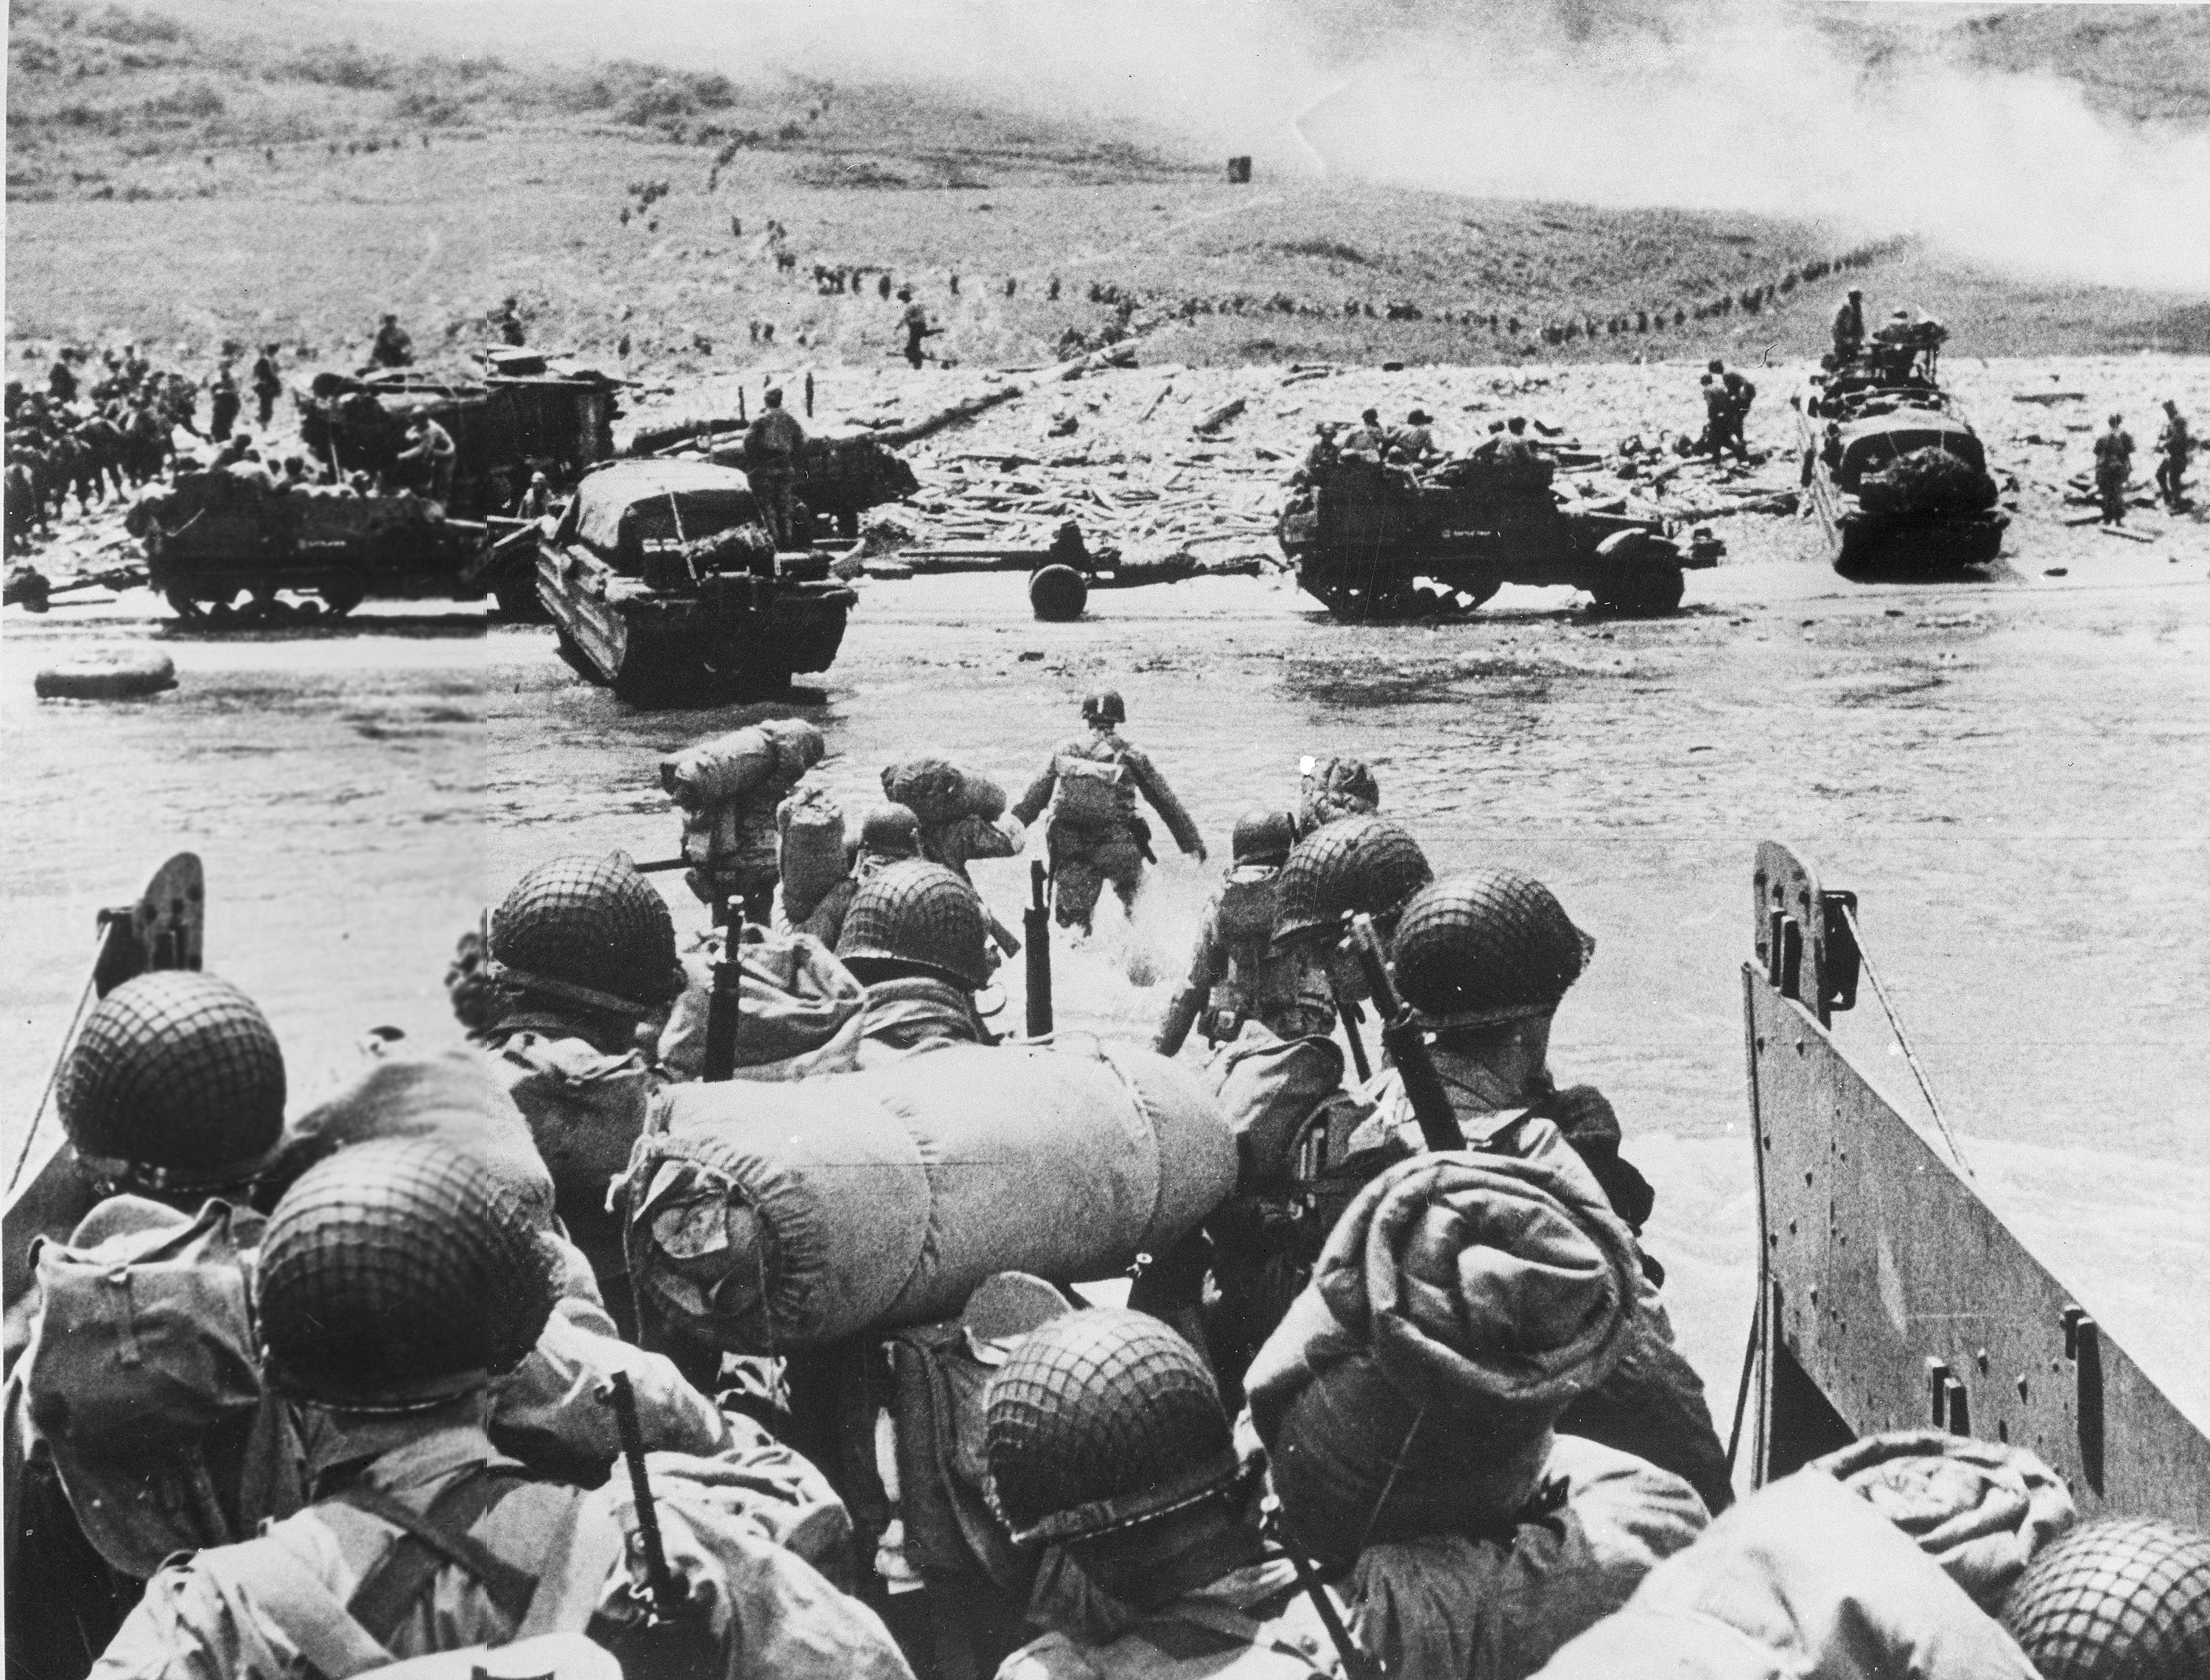 Remembering D-Day: Key facts and figures about the invasion that changed the course of World War II